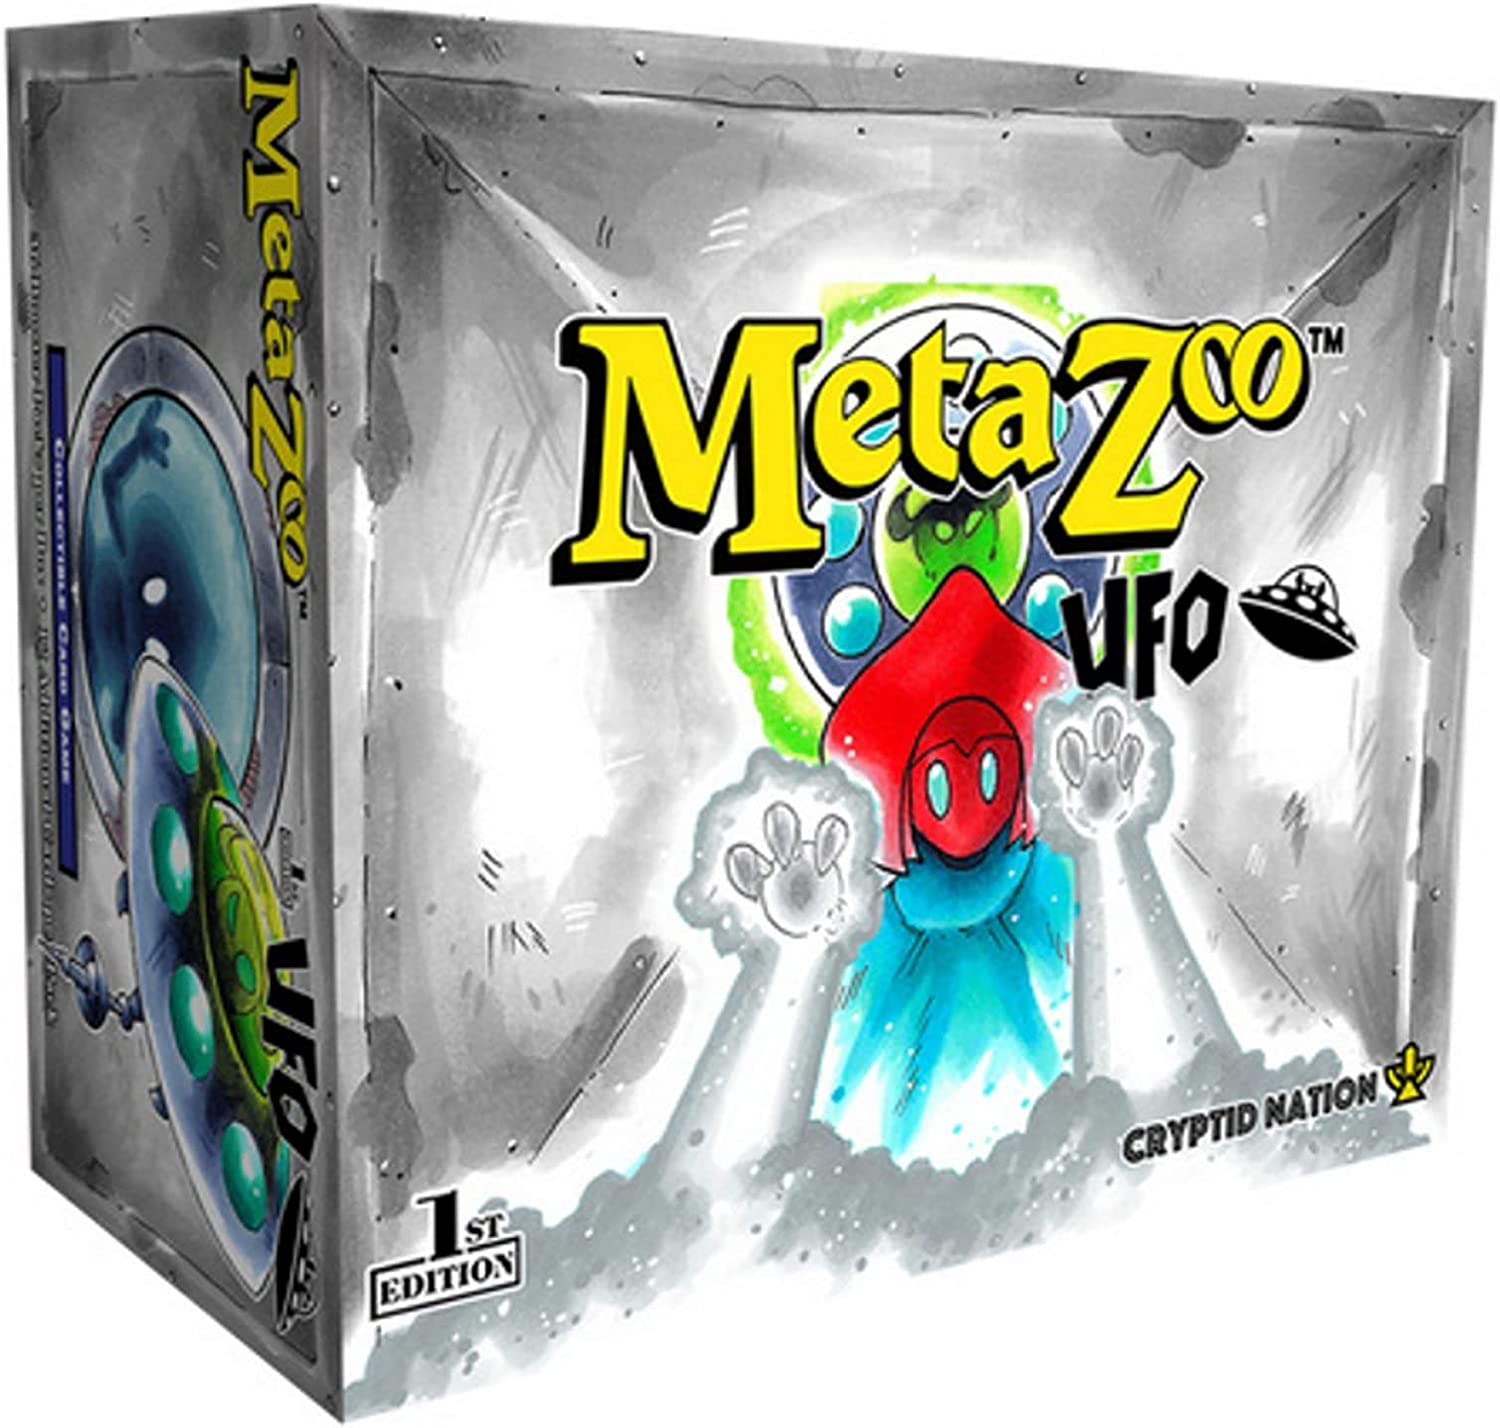 UFO 1st Edition Booster Box Display - 1st Edition - MetaZoo - EN